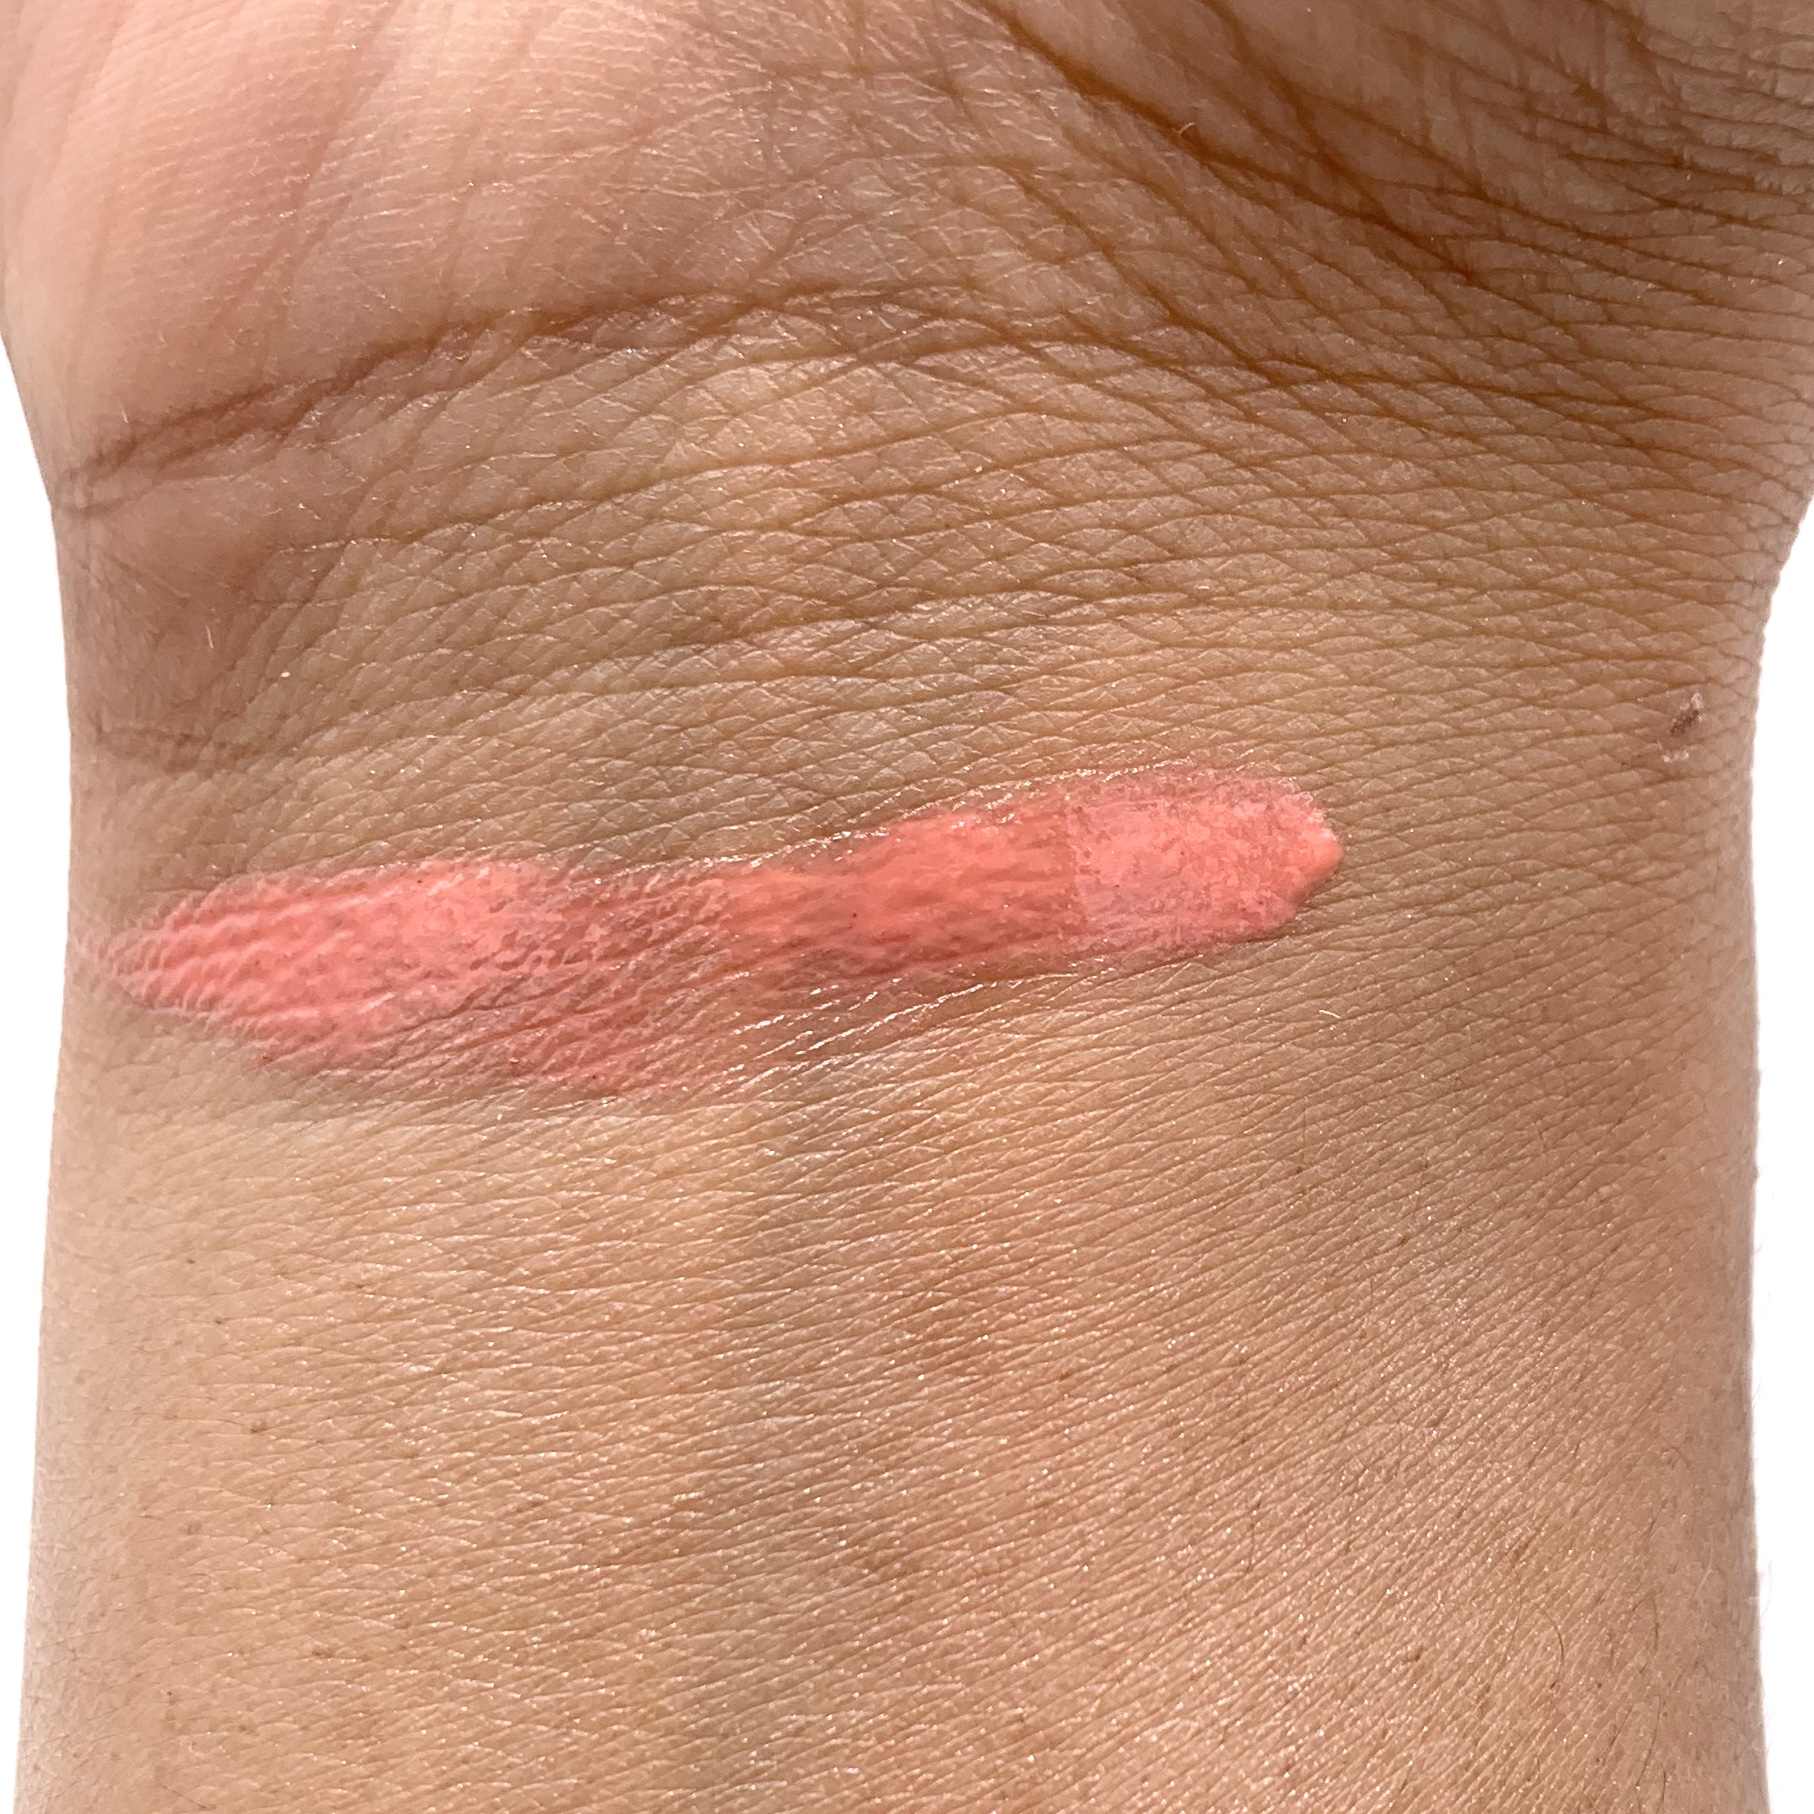 Dr. Pawpaw Tinted Peach Pink Balm Swatch for Birchbox July 2020